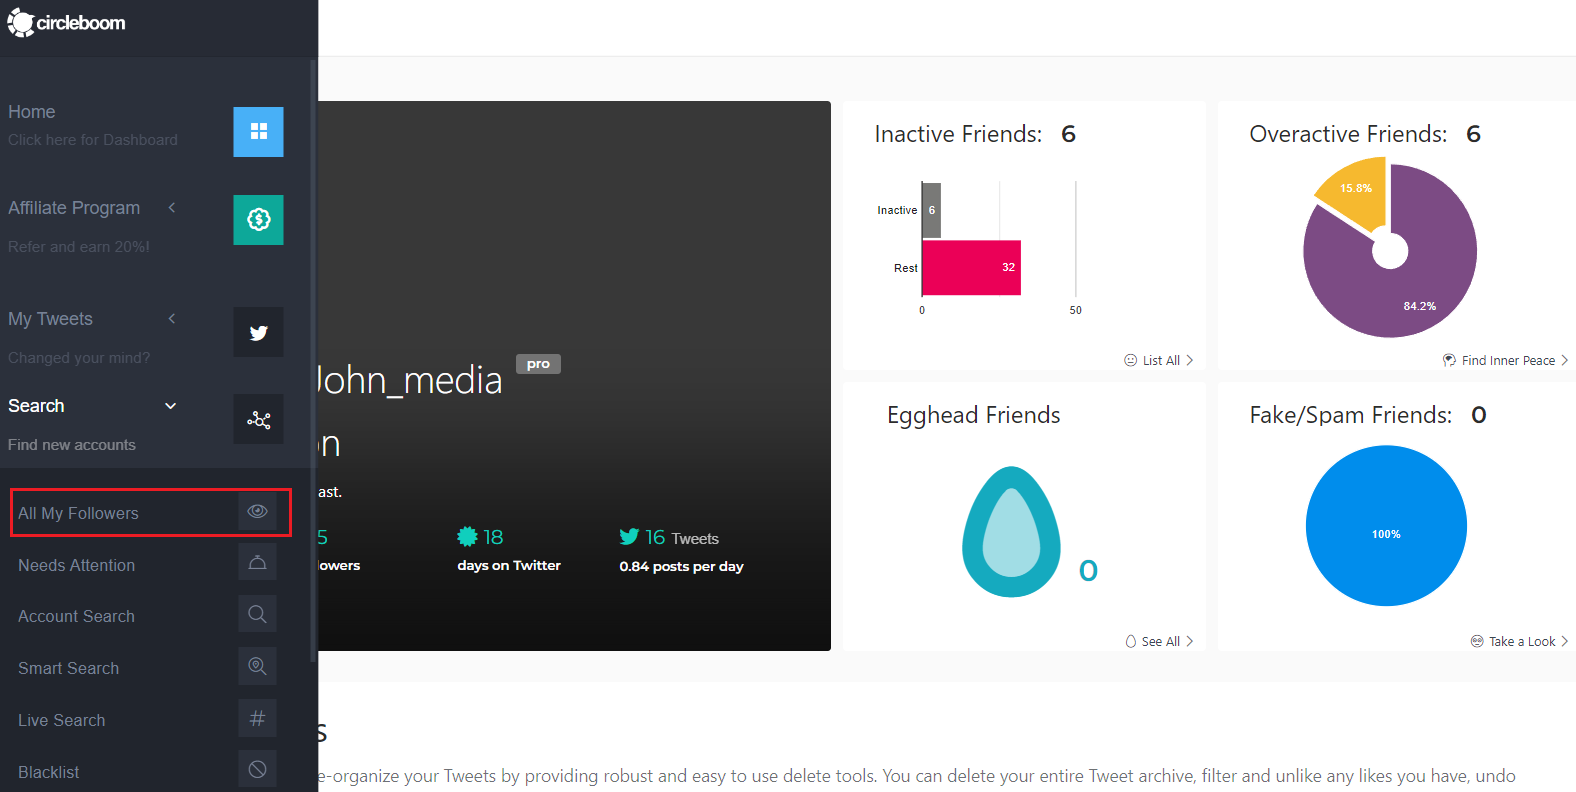 You can view all your followers on Circleboom's dashboard by clicking on Search